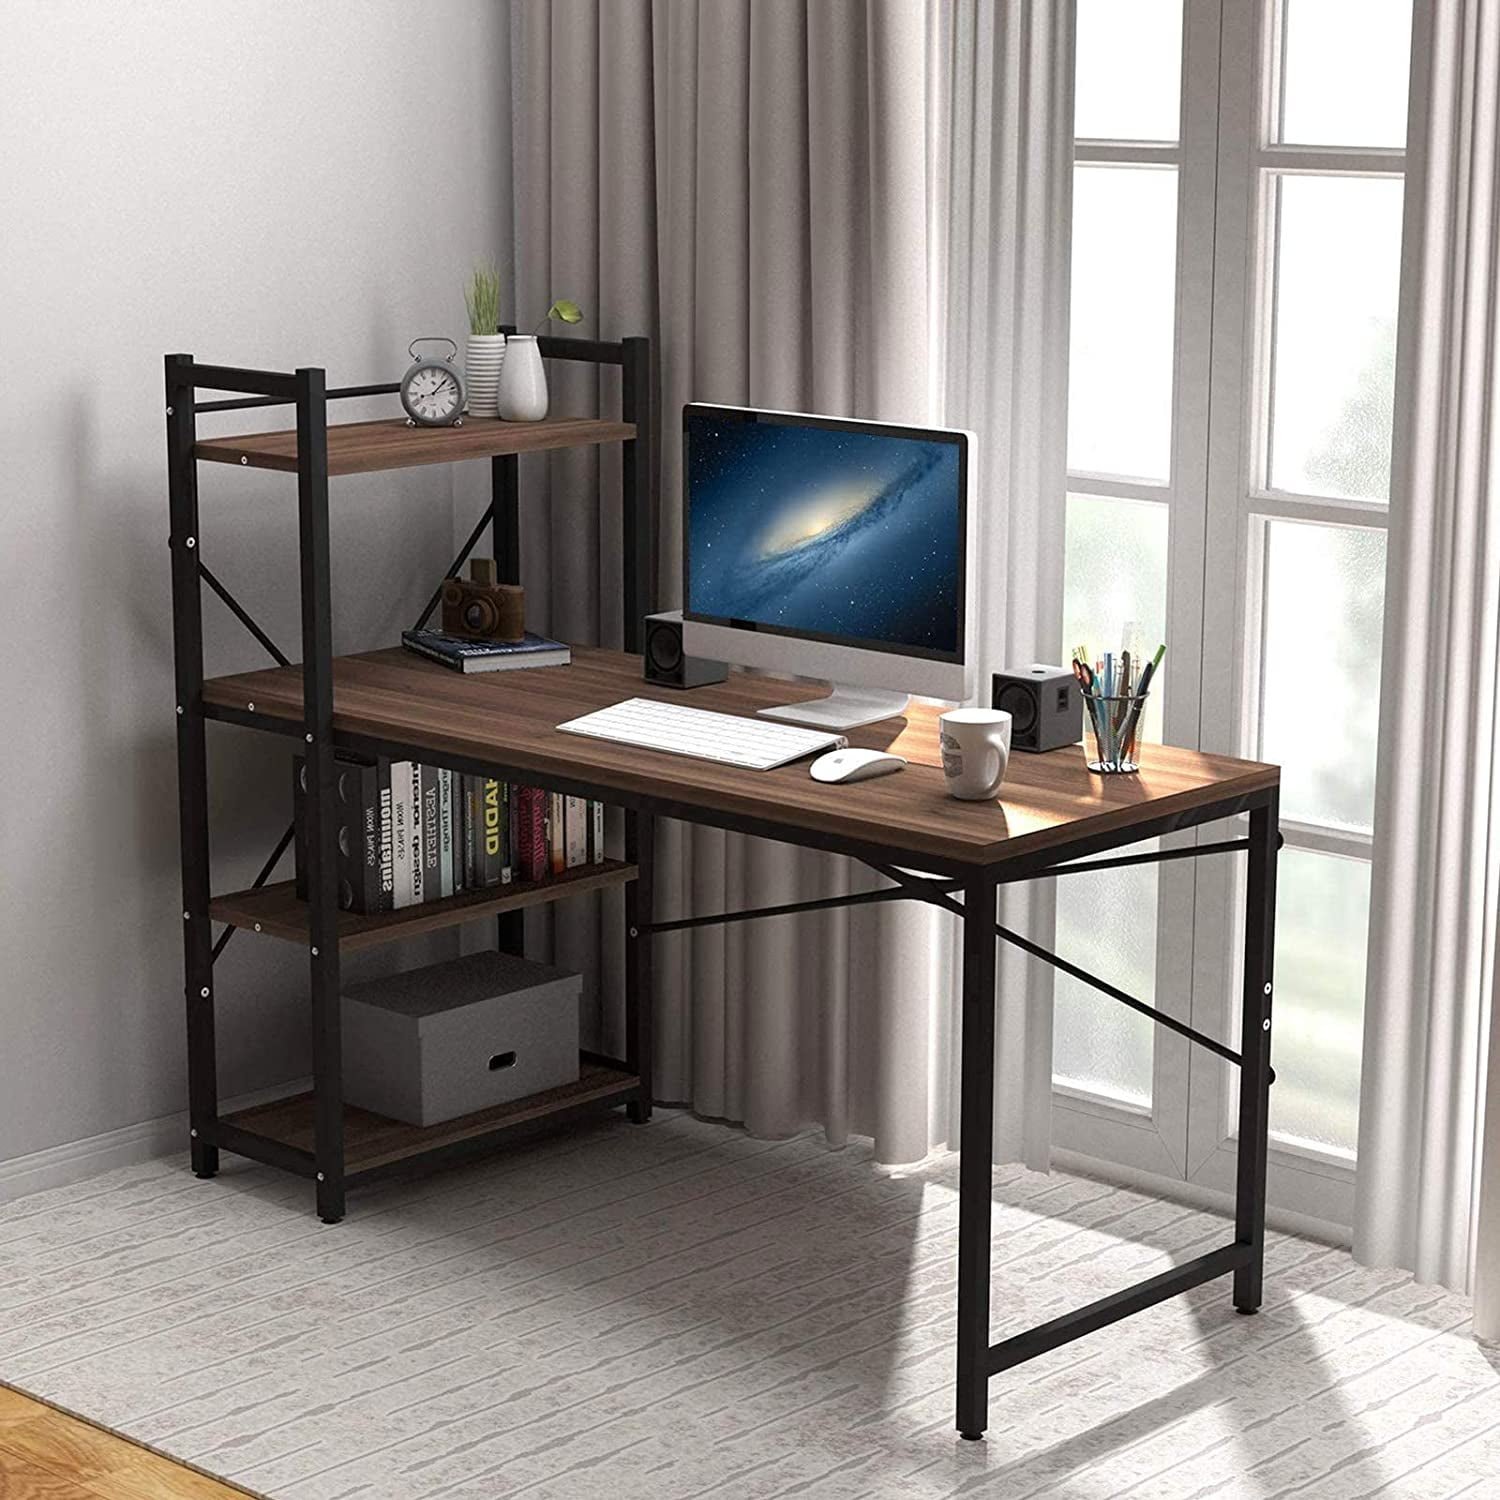 Tower Computer Desk With 4 Tier Storage, Small Computer Desk With Drawers And Shelves